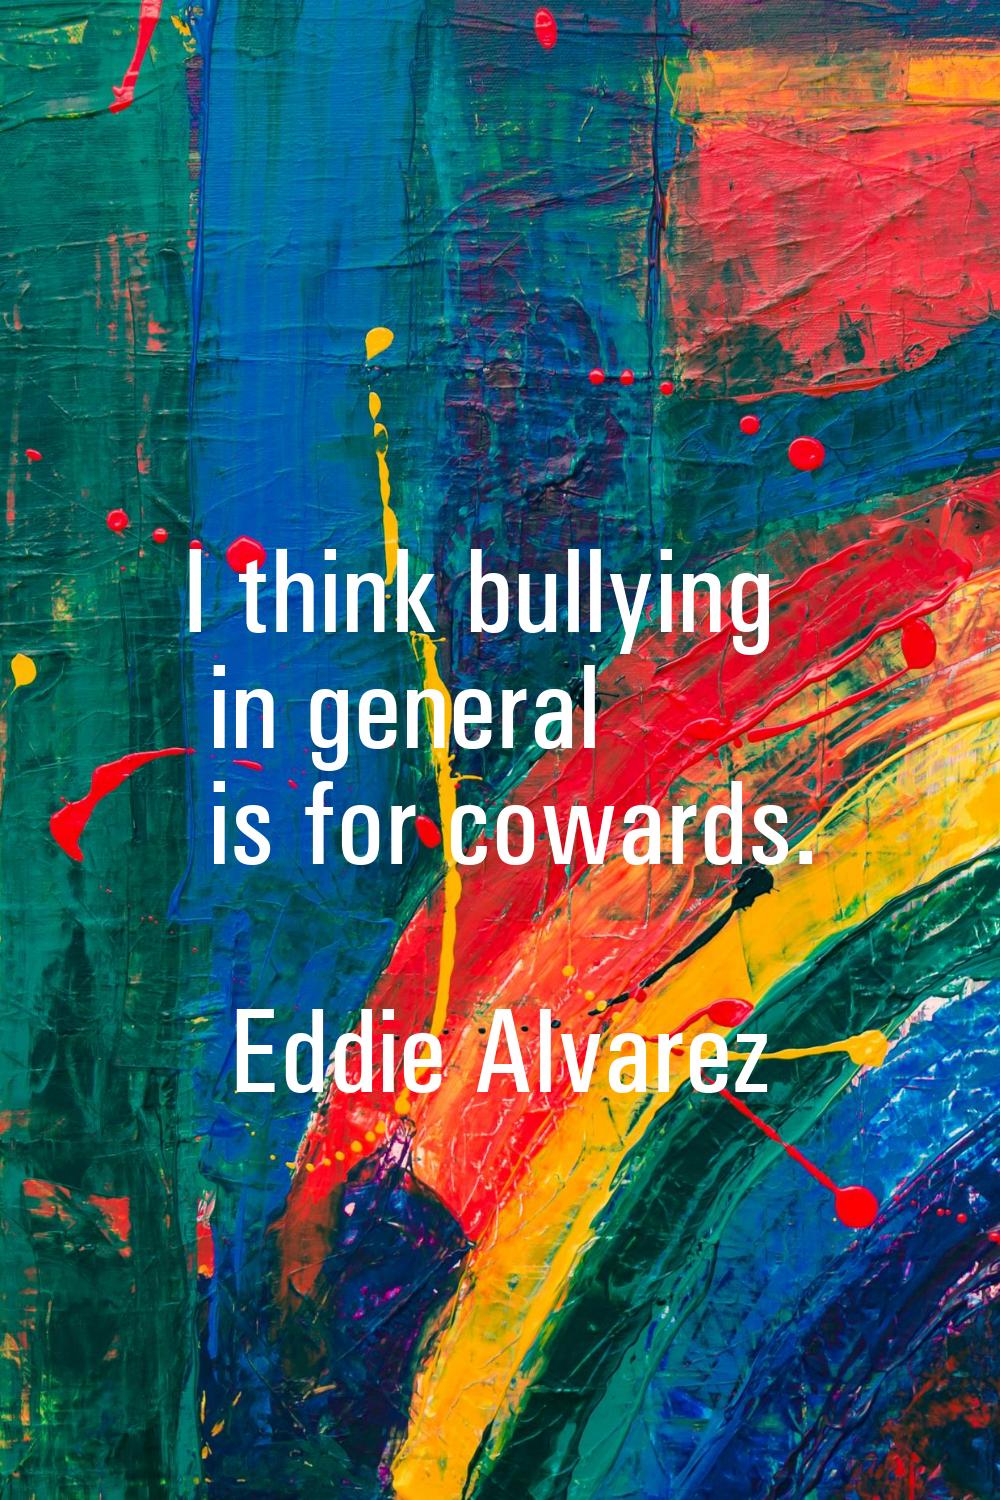 I think bullying in general is for cowards.